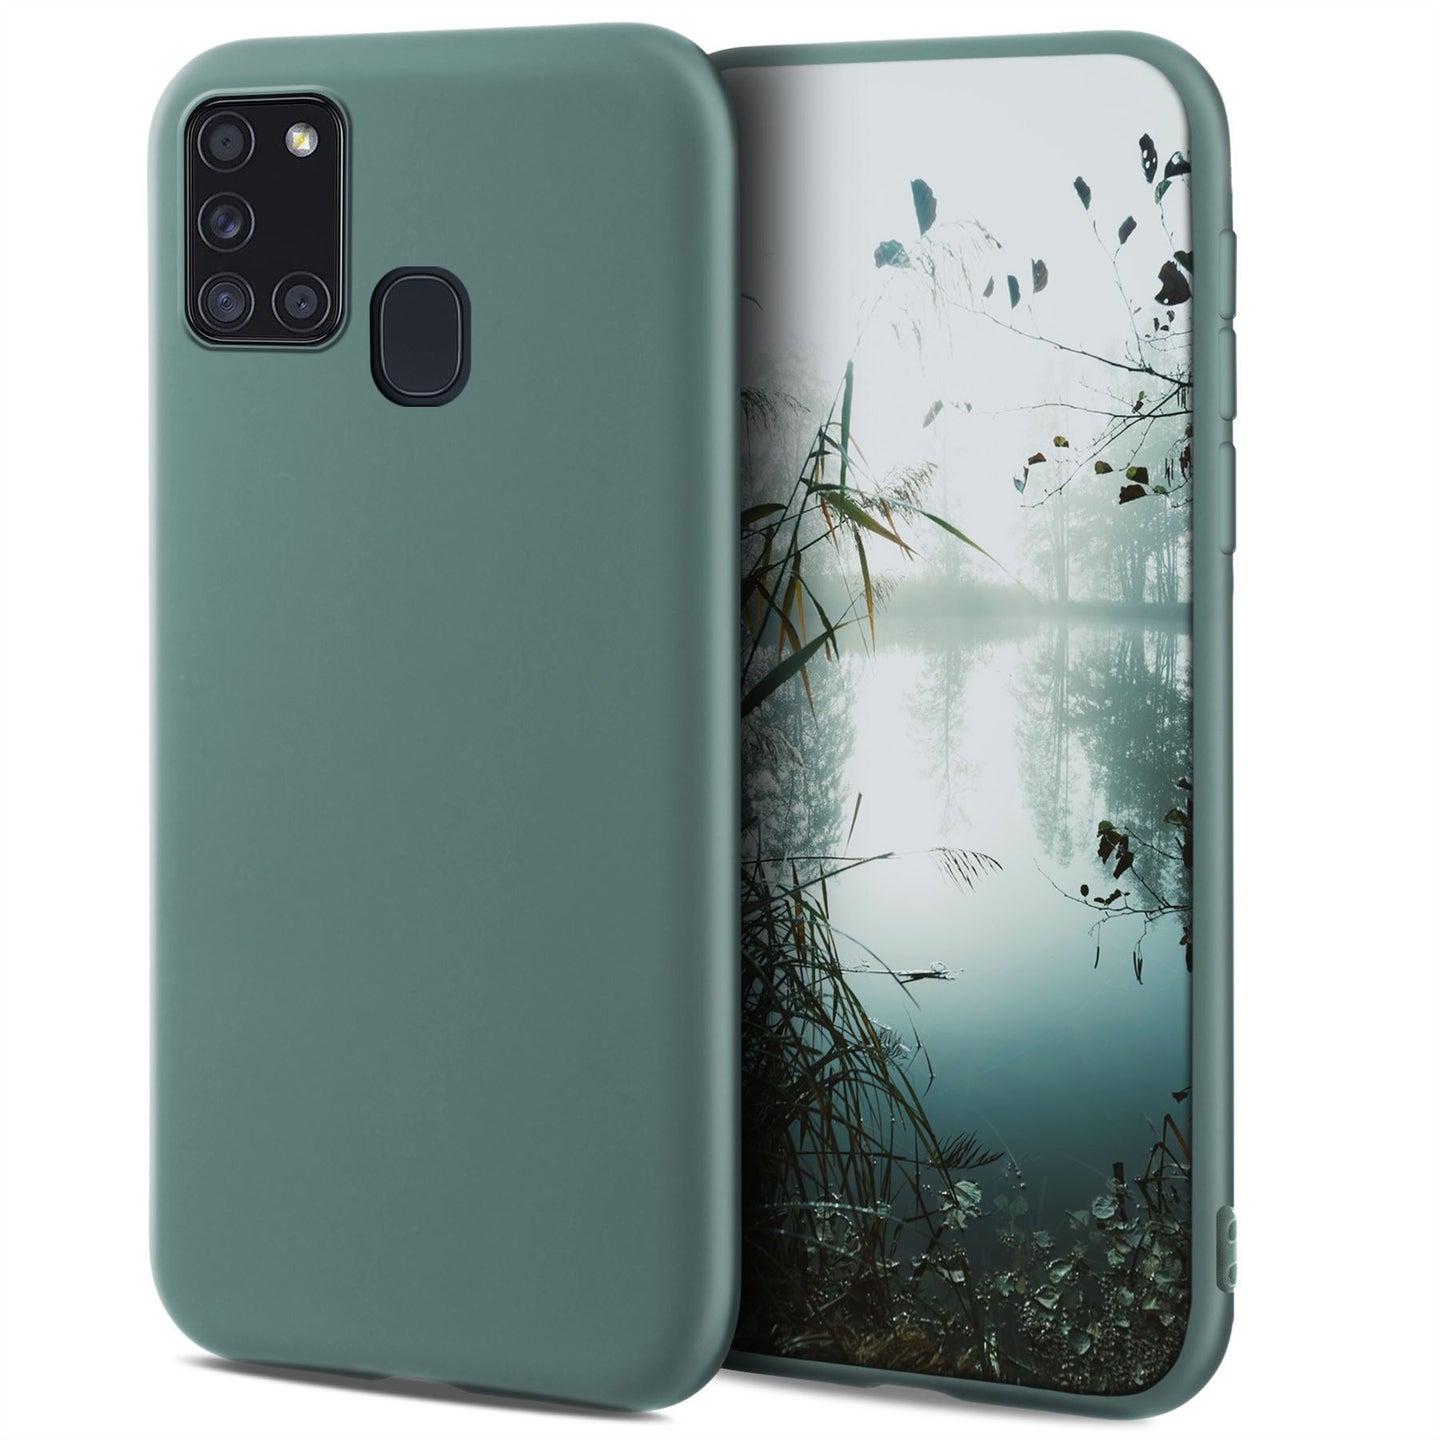 Moozy Minimalist Series Silicone Case for Samsung A21s, Blue Grey - Matte Finish Slim Soft TPU Cover